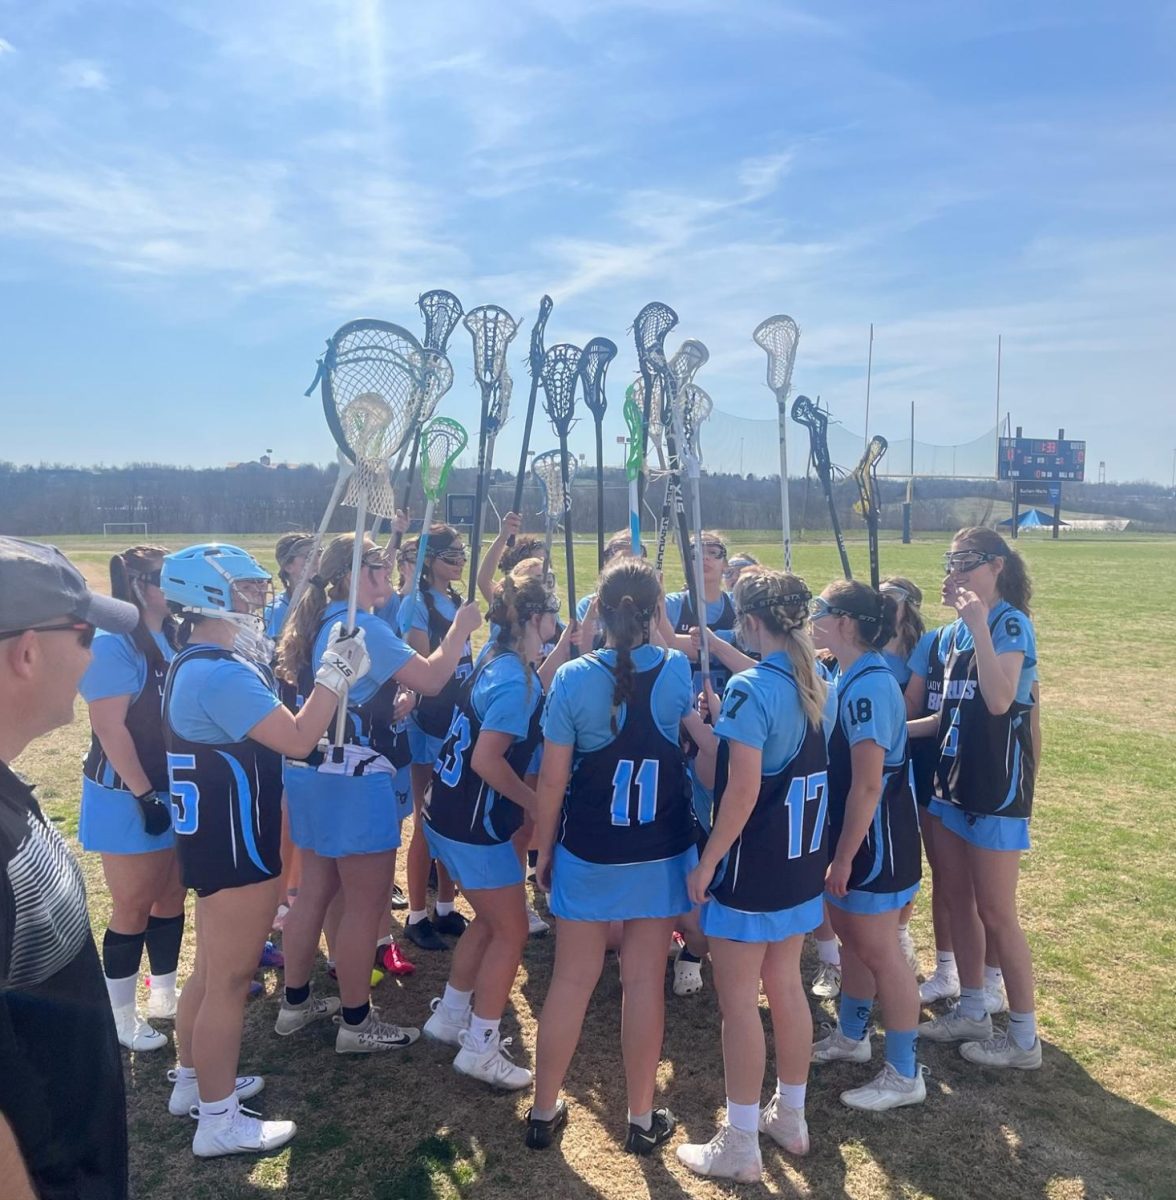 The+%E2%80%98Lady+Bruin%E2%80%99+Lacrosse+Team+readying+up+for+a+match+by+collaboratively+raising+their+lacrosse+sticks+in+a+team+huddle.+Photo+courtesy+of+senior+lacrosse+player+Alexis+Anderson.+